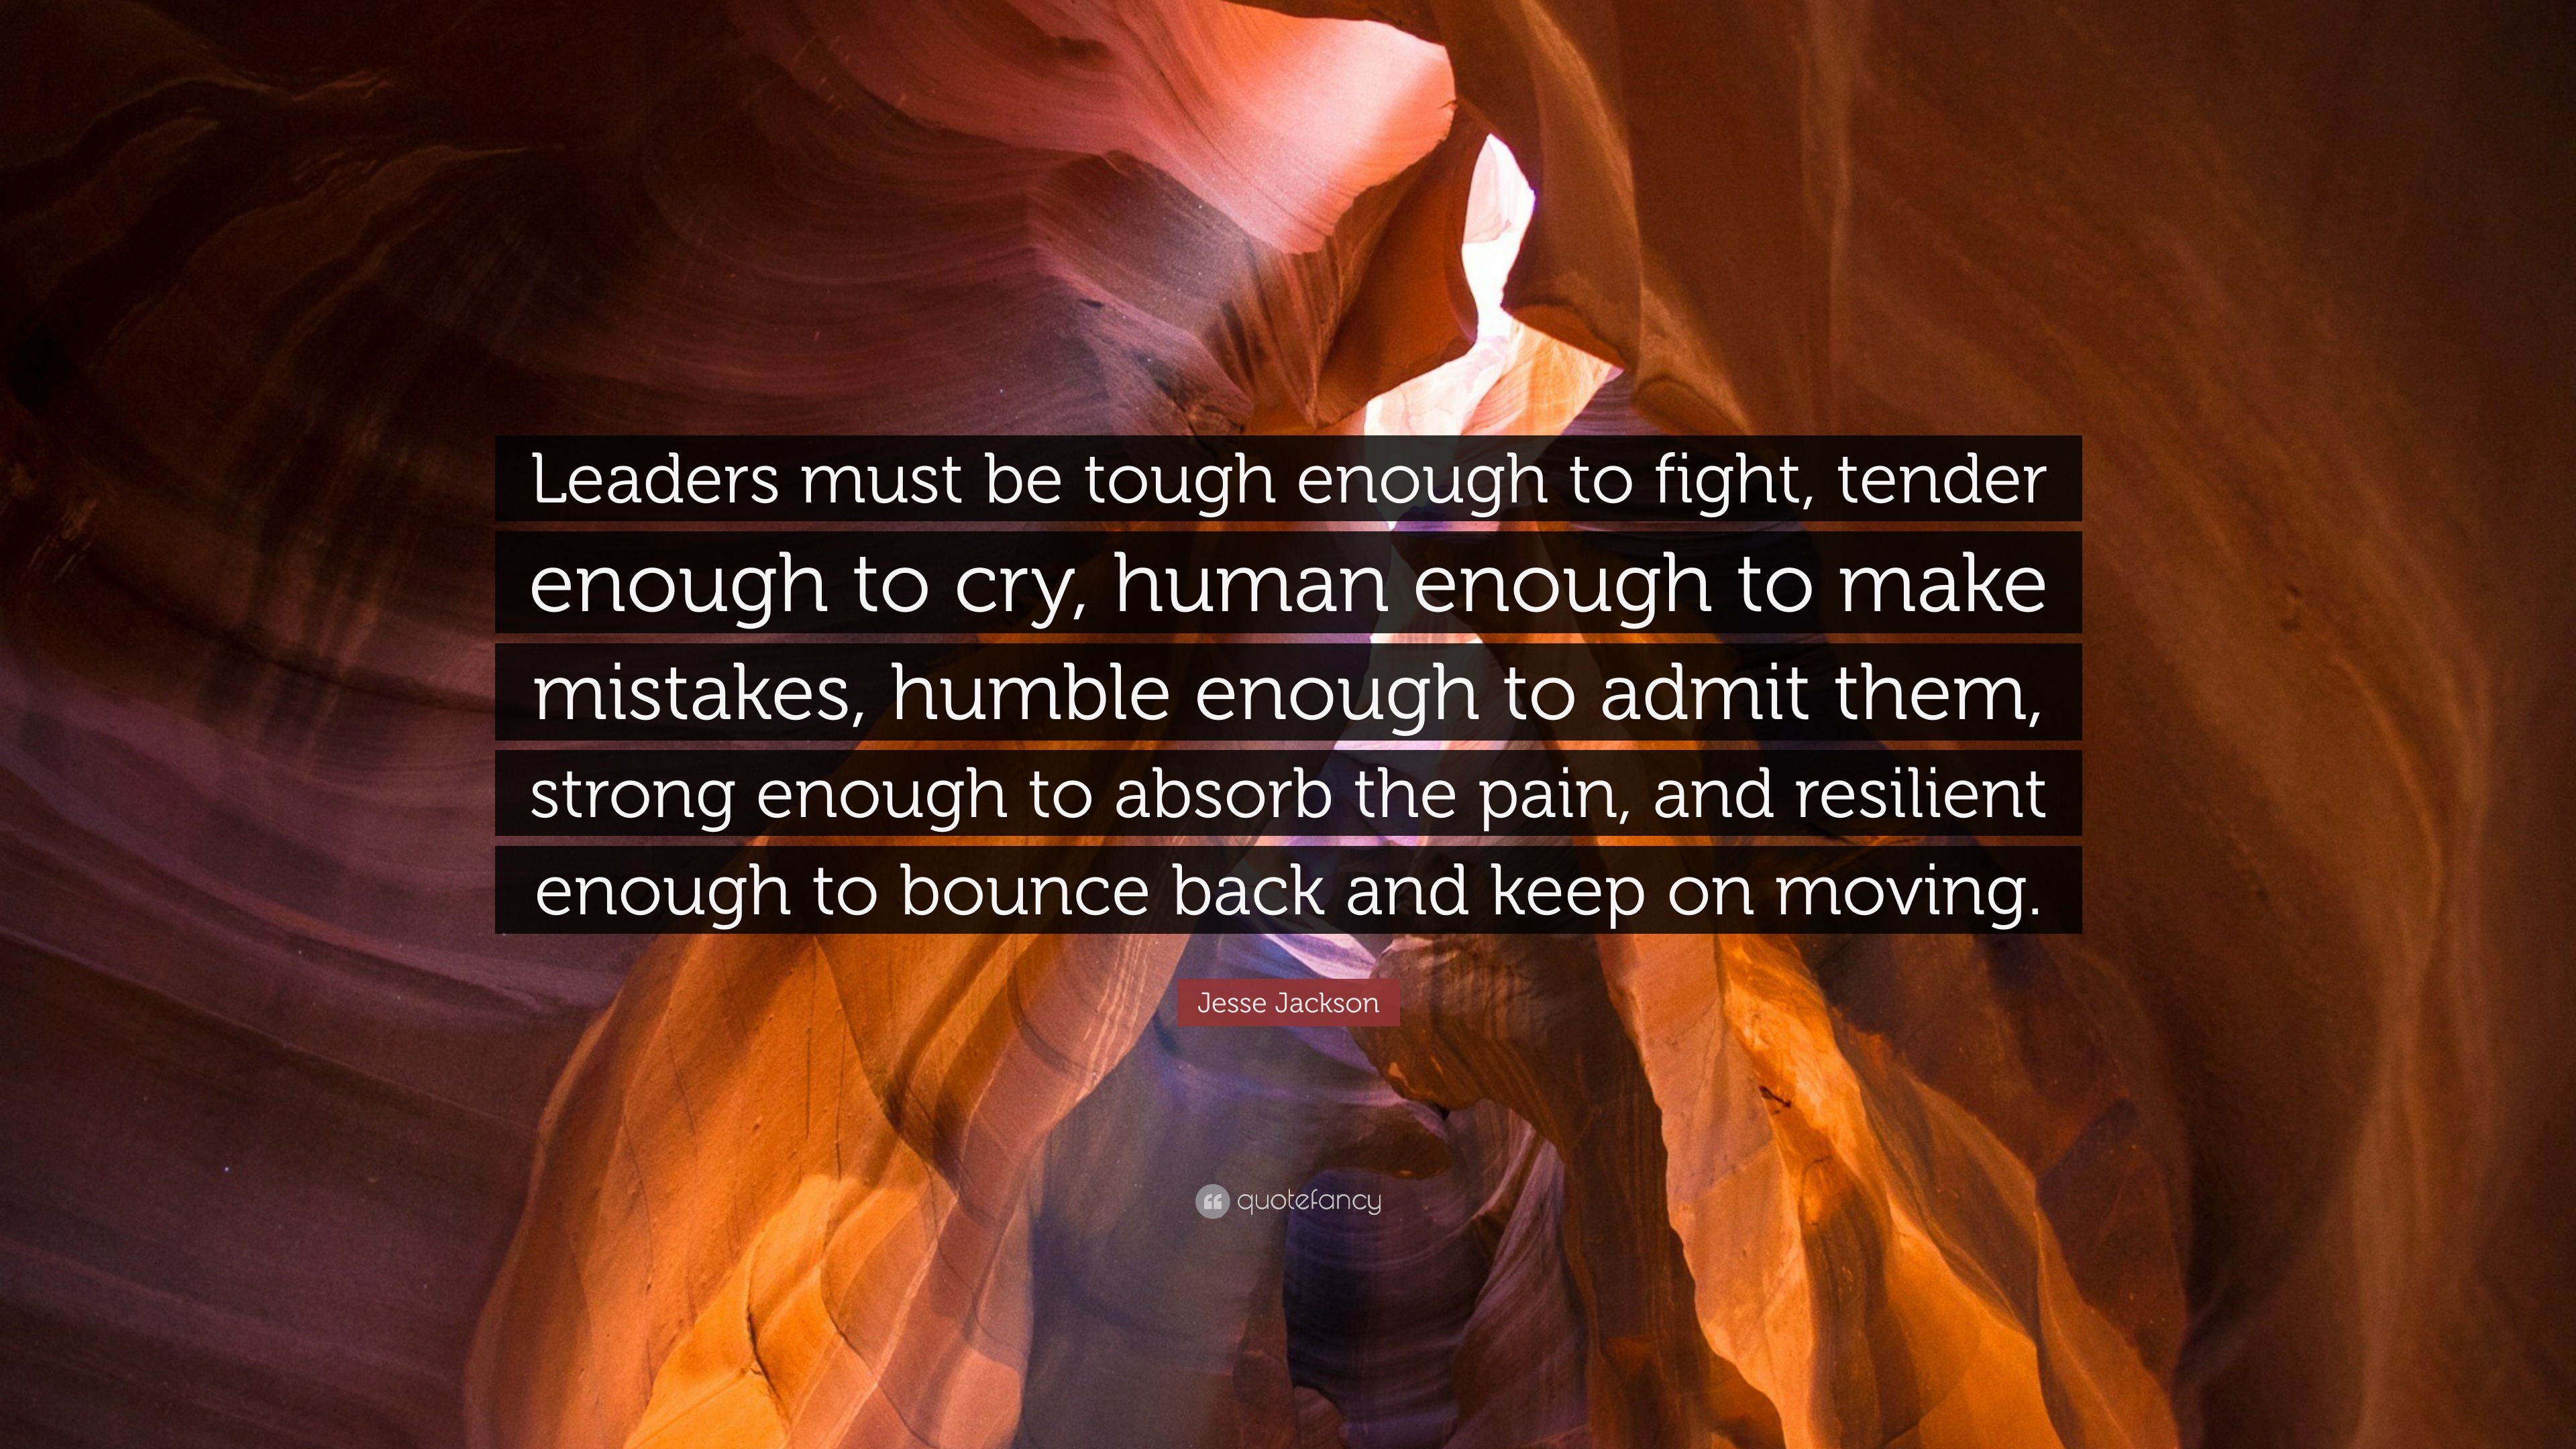 Jesse Jackson Quote Leaders Must Be Tough Enough To Fight Tender Enough To Cry Human Enough To Make Mistakes Humble Enough To Admit Them 9 Wallpapers Quotefancy